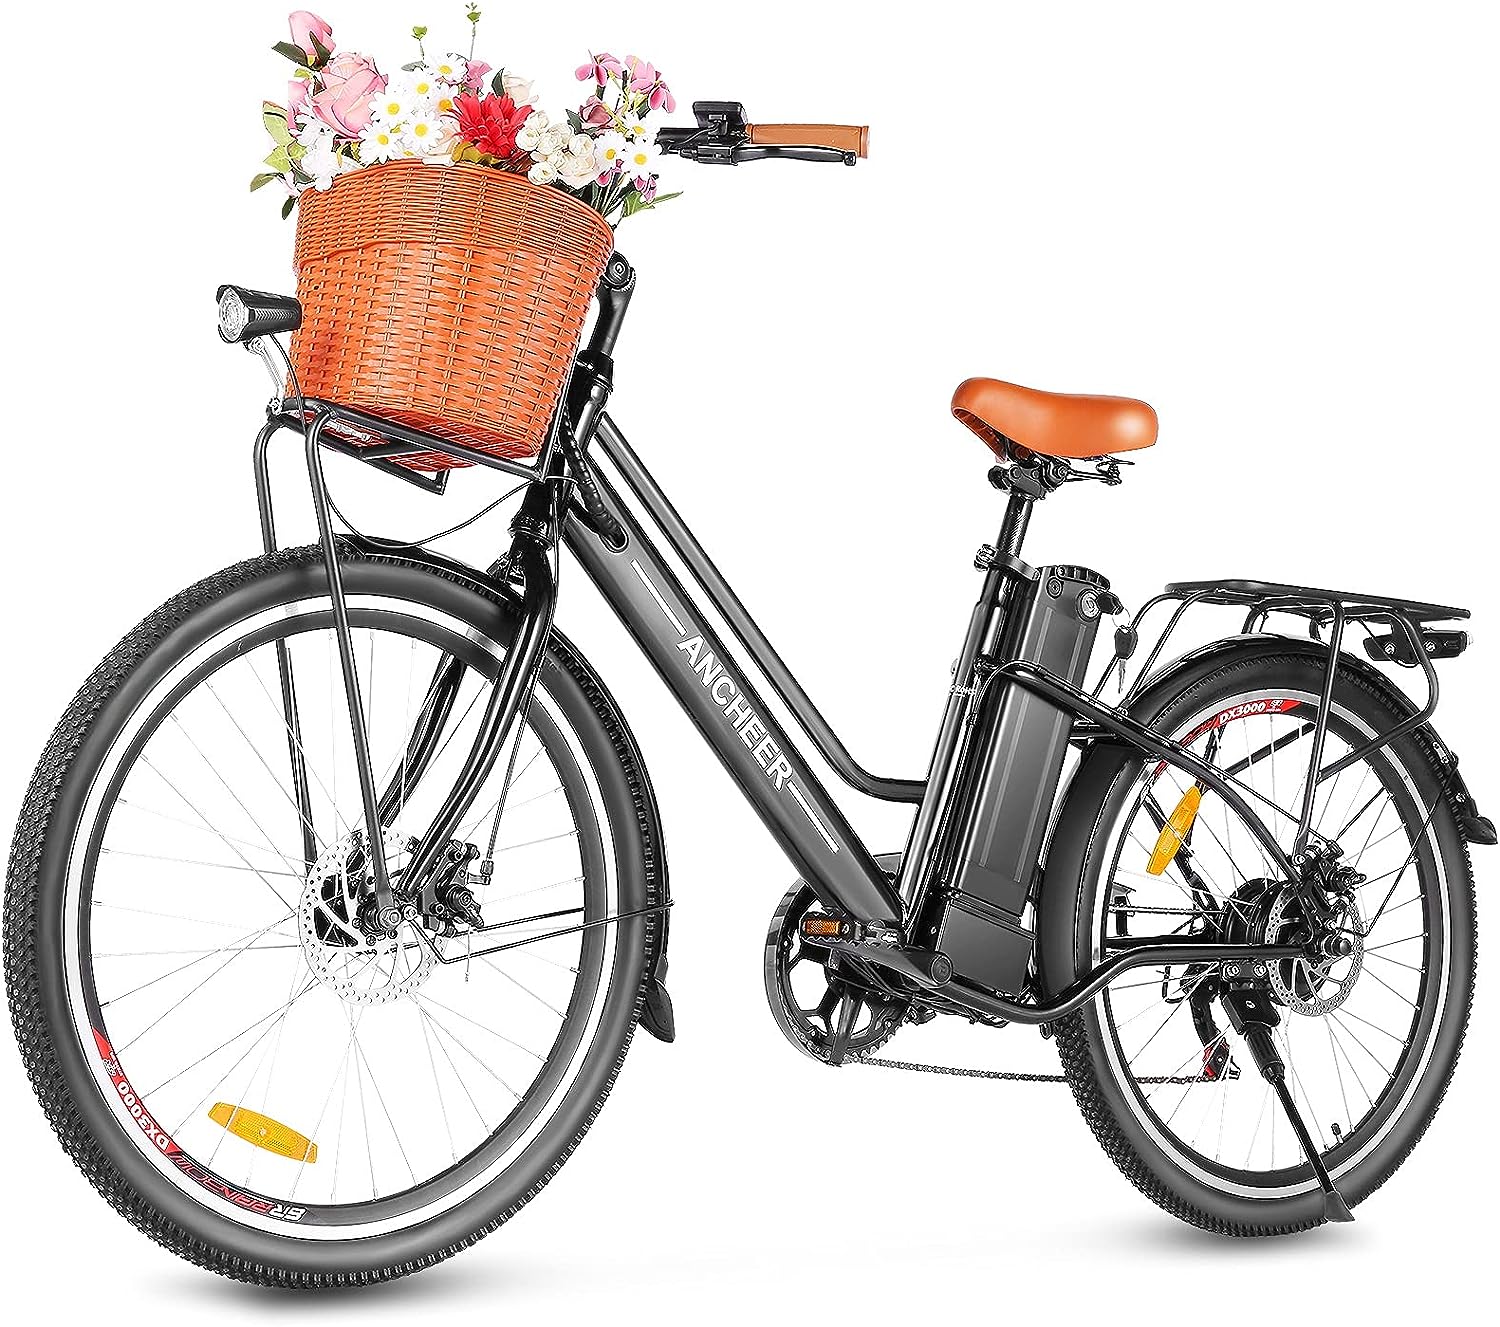 selection of commuter e-bikes in different colors and styles